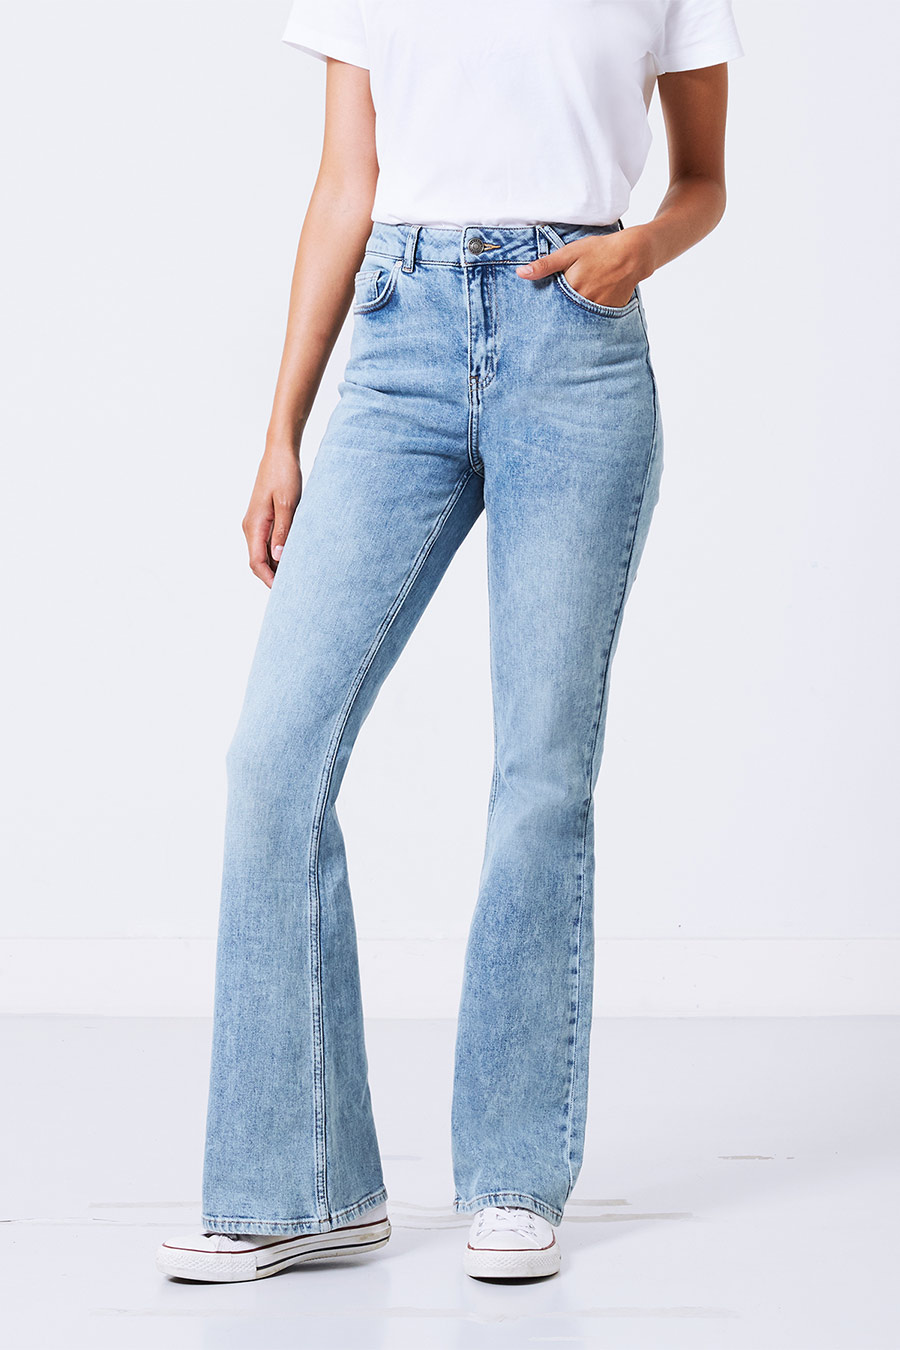 women jeans fitguide | America Today